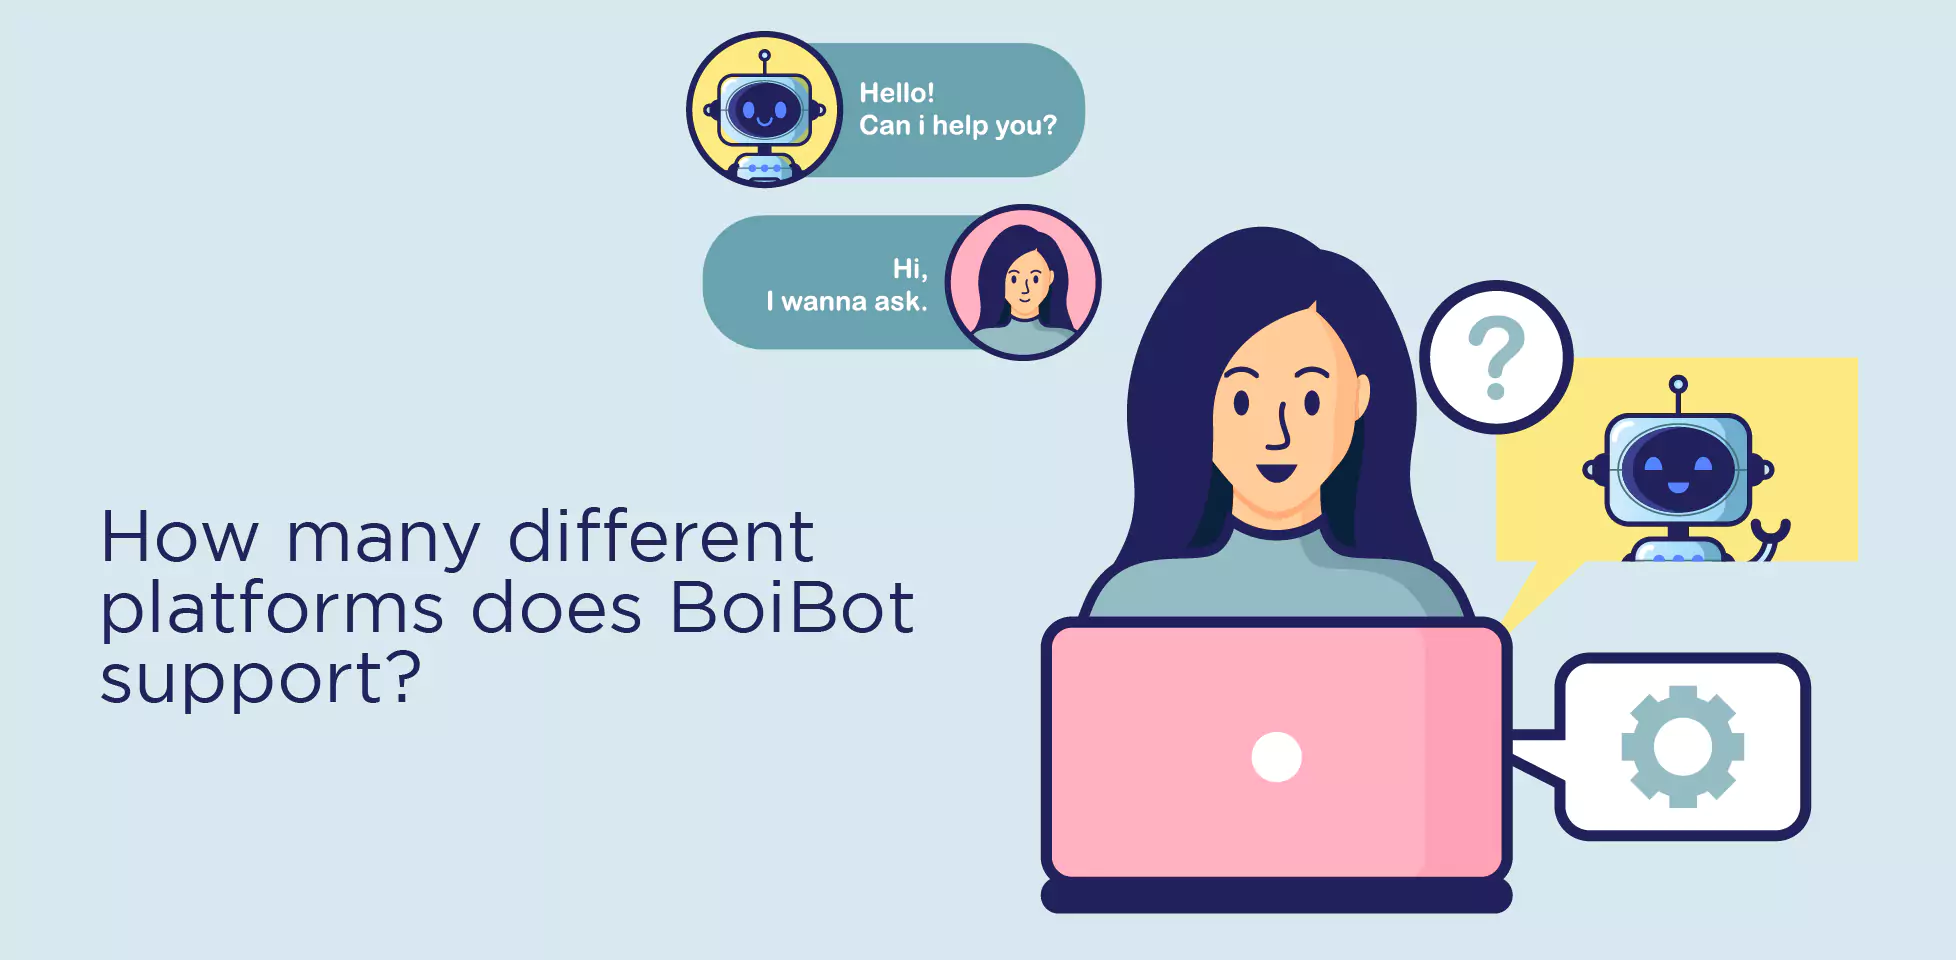 How many different platforms does BoiBot support?